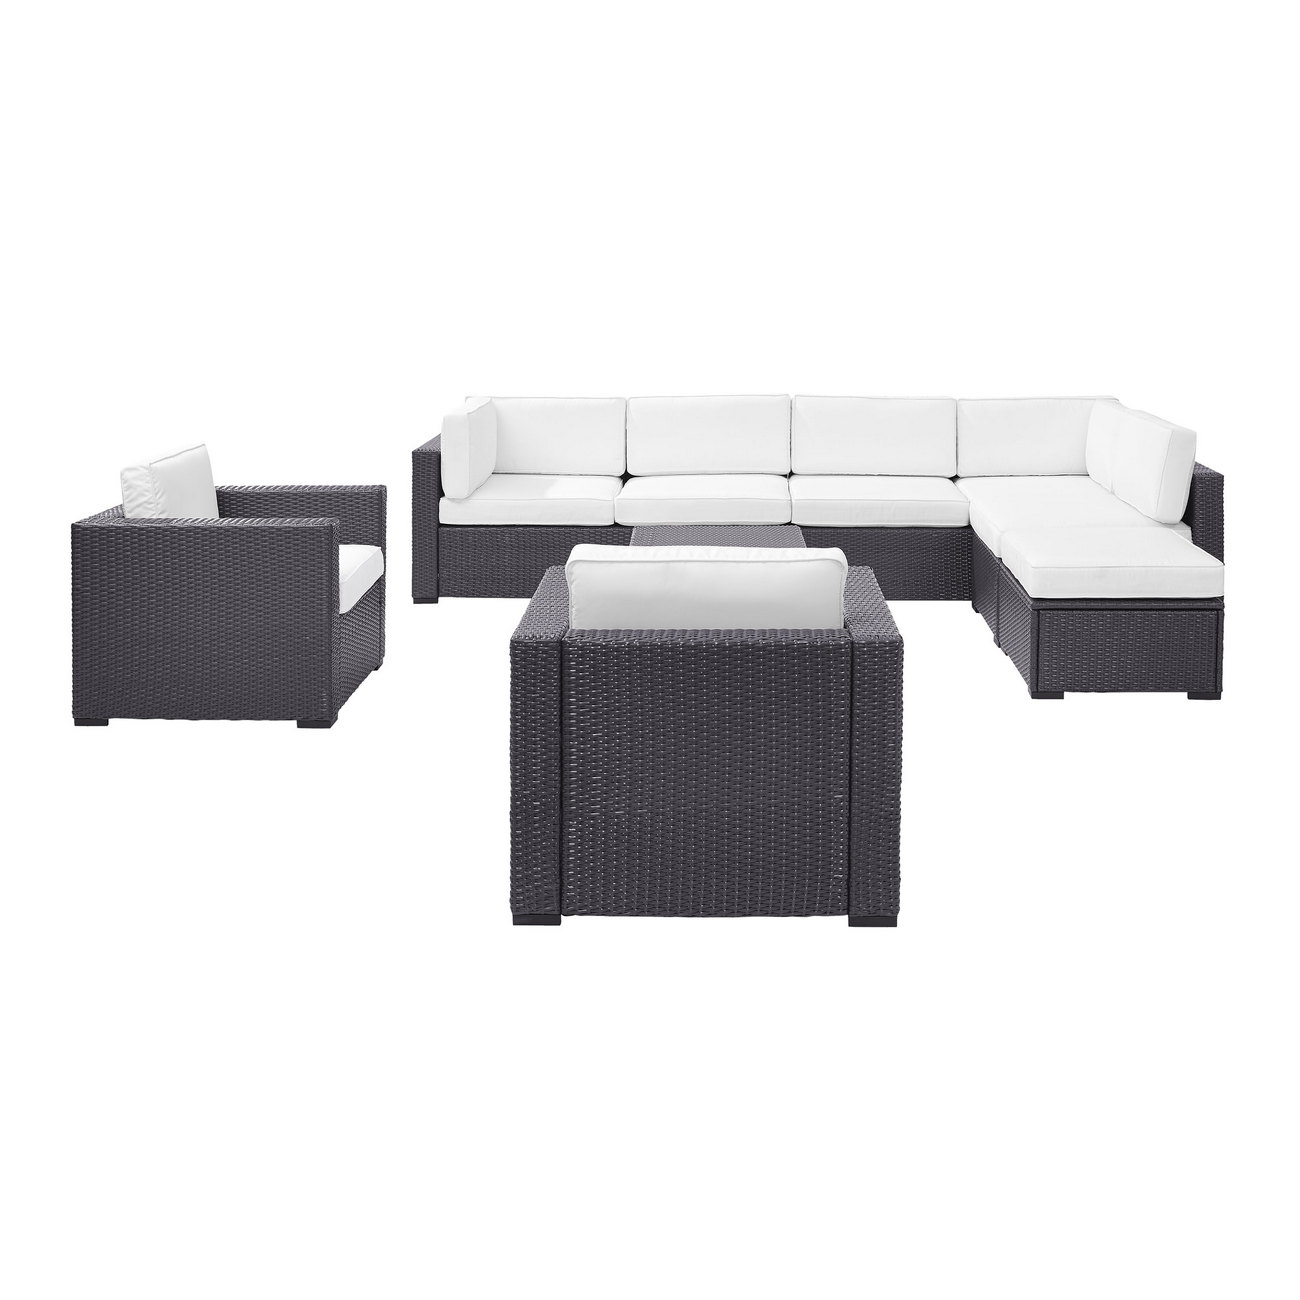 Outdoor Sectional Set Chair Coffee Table Ottoman Loveseats Arm Crosley